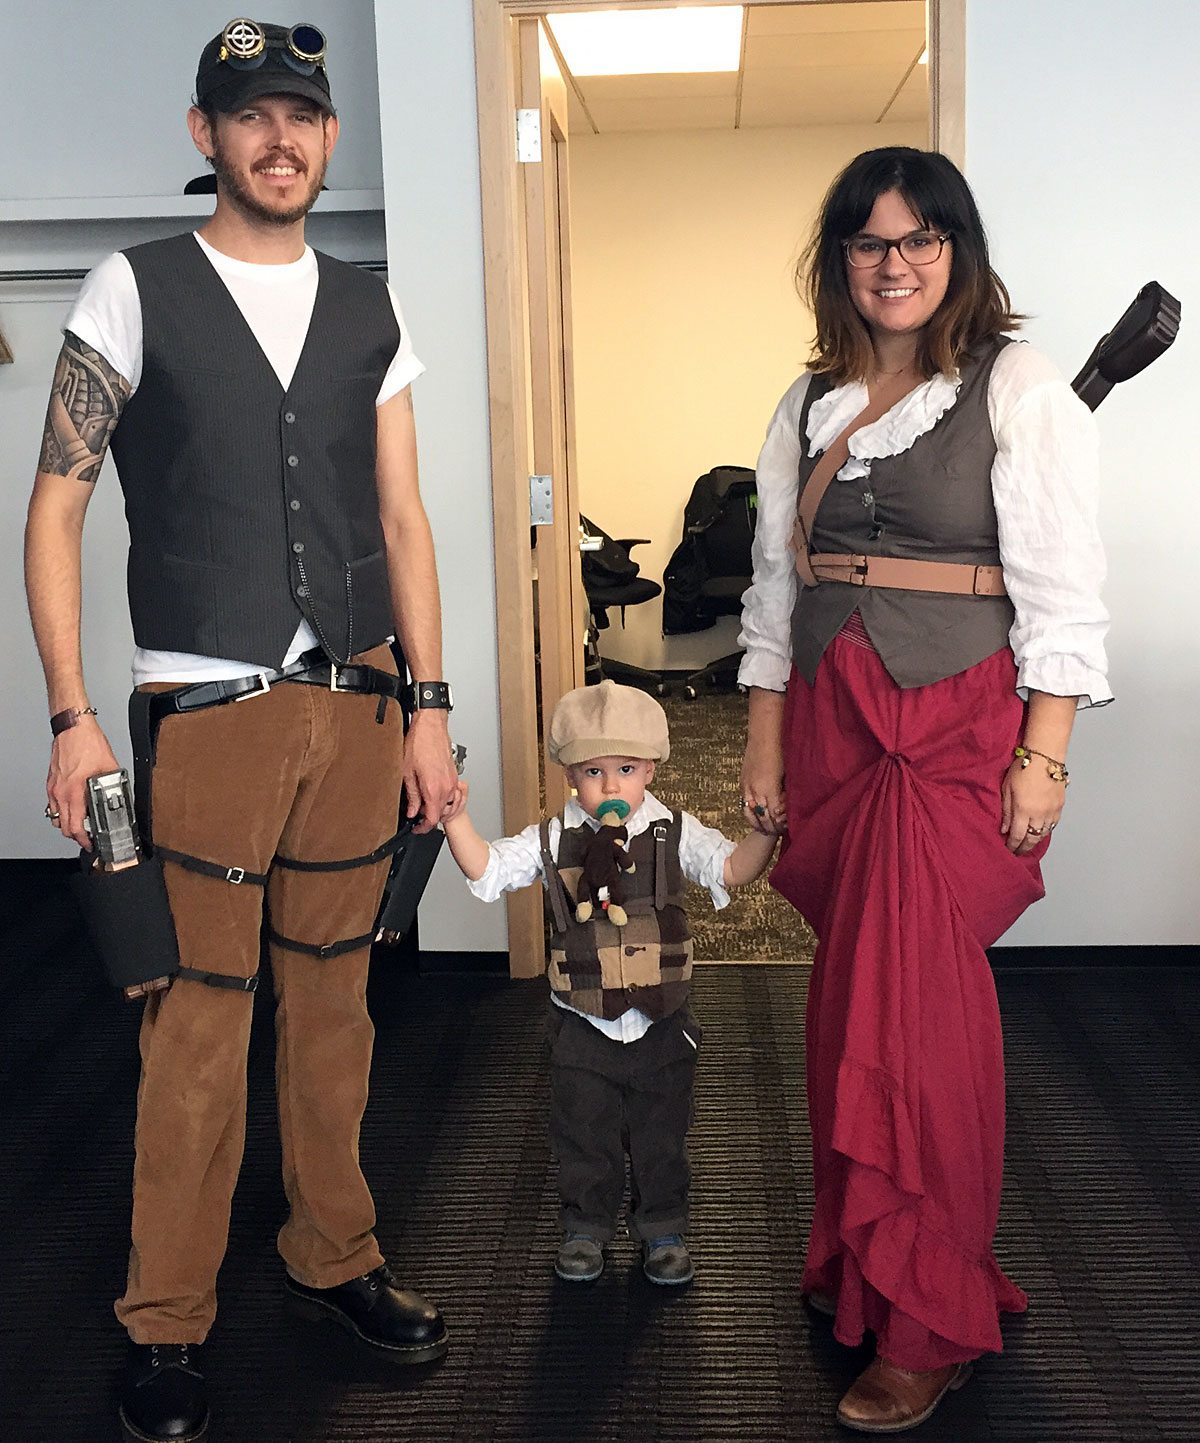 Steampunk family off to our first family Con! Photo by Will James.